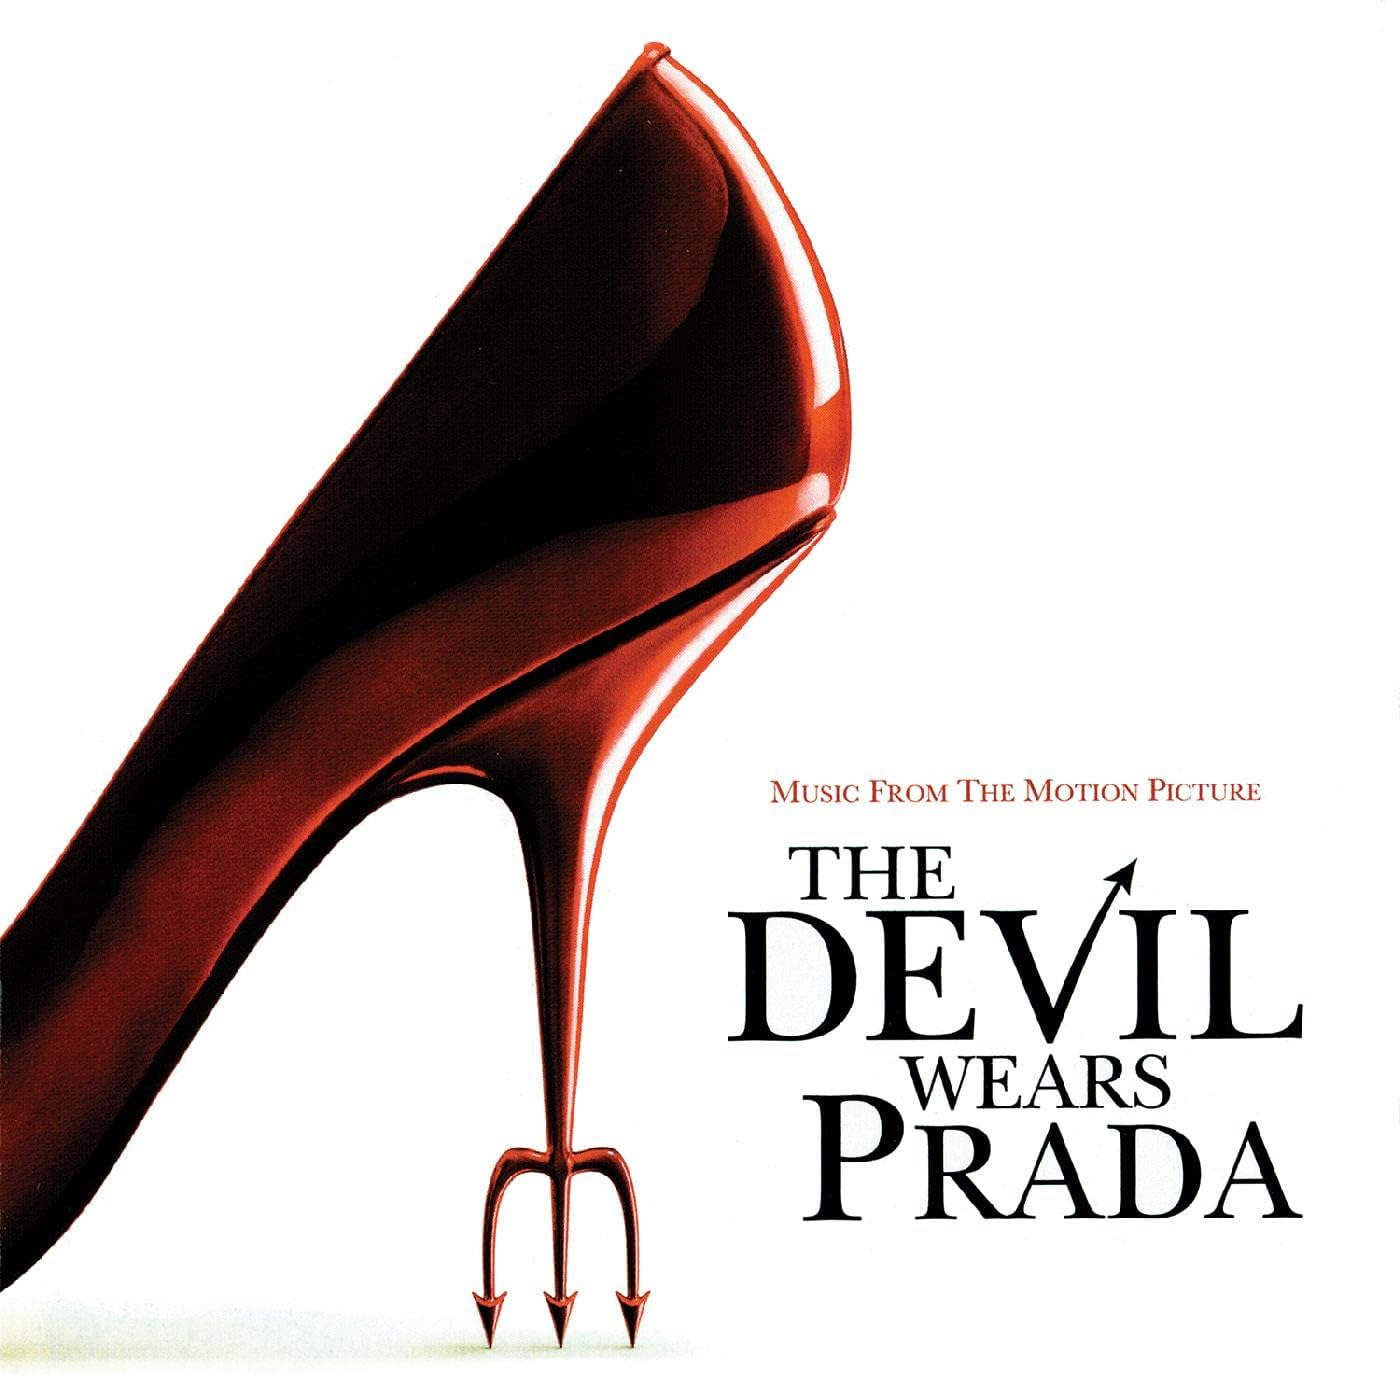 The Devil Wears Prada: Music from the Motion Picture